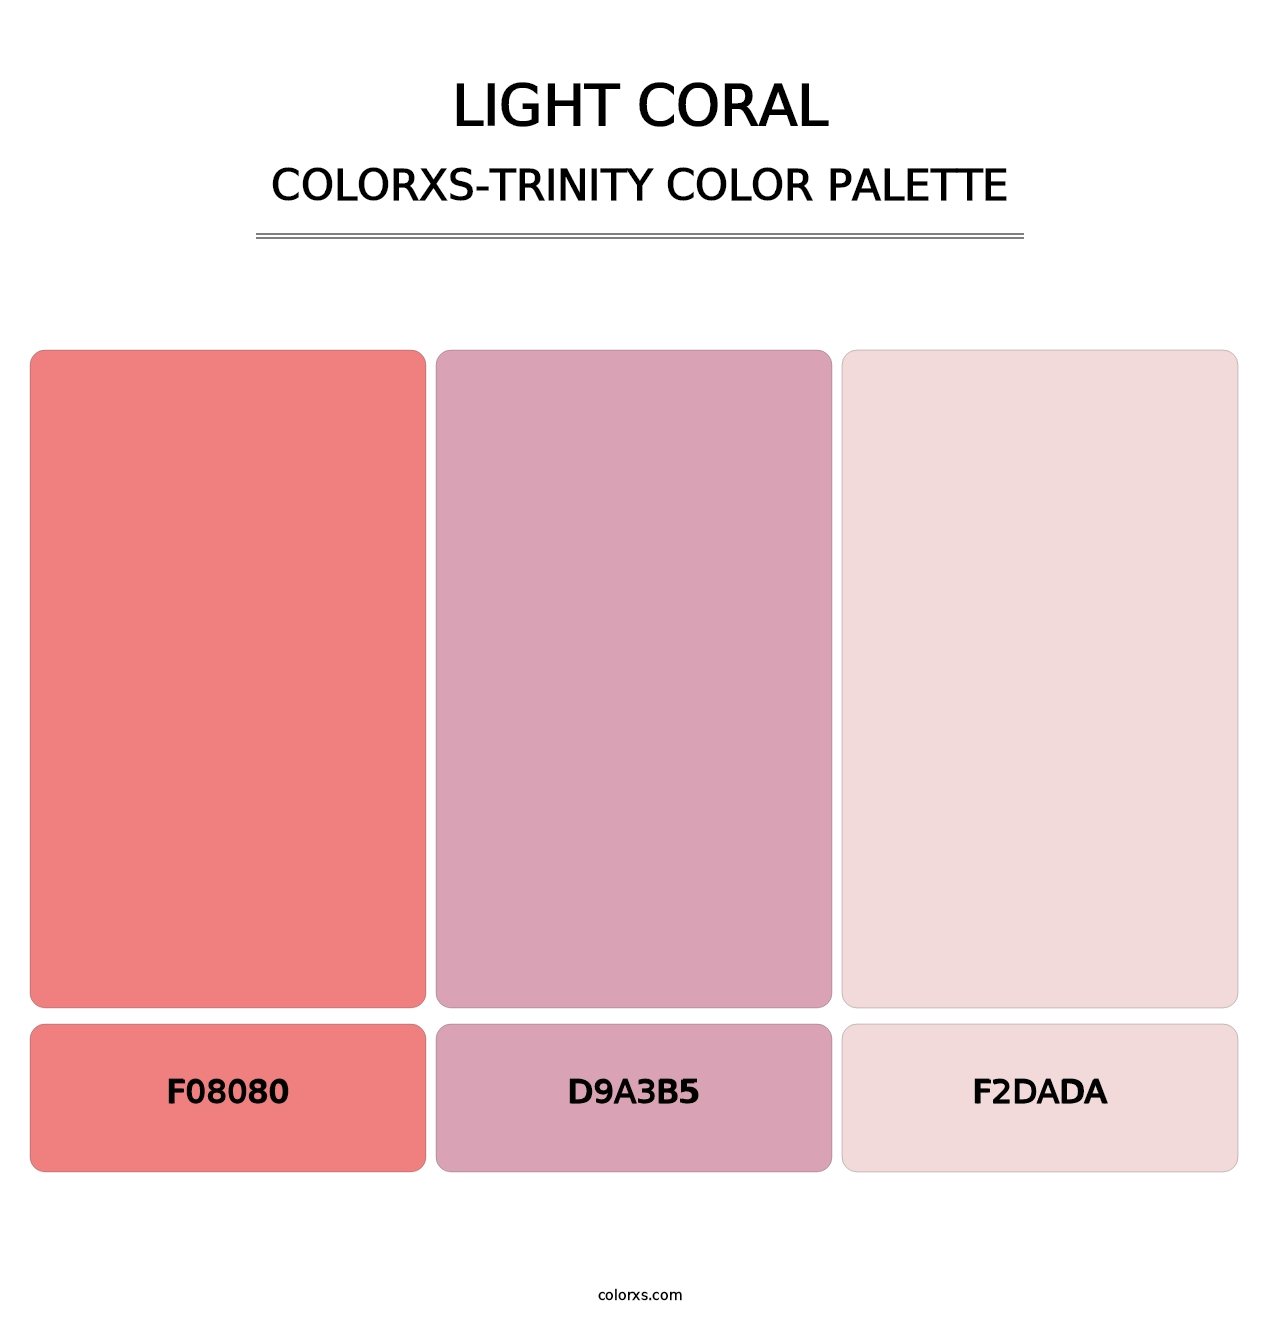 Light Coral - Colorxs Trinity Palette